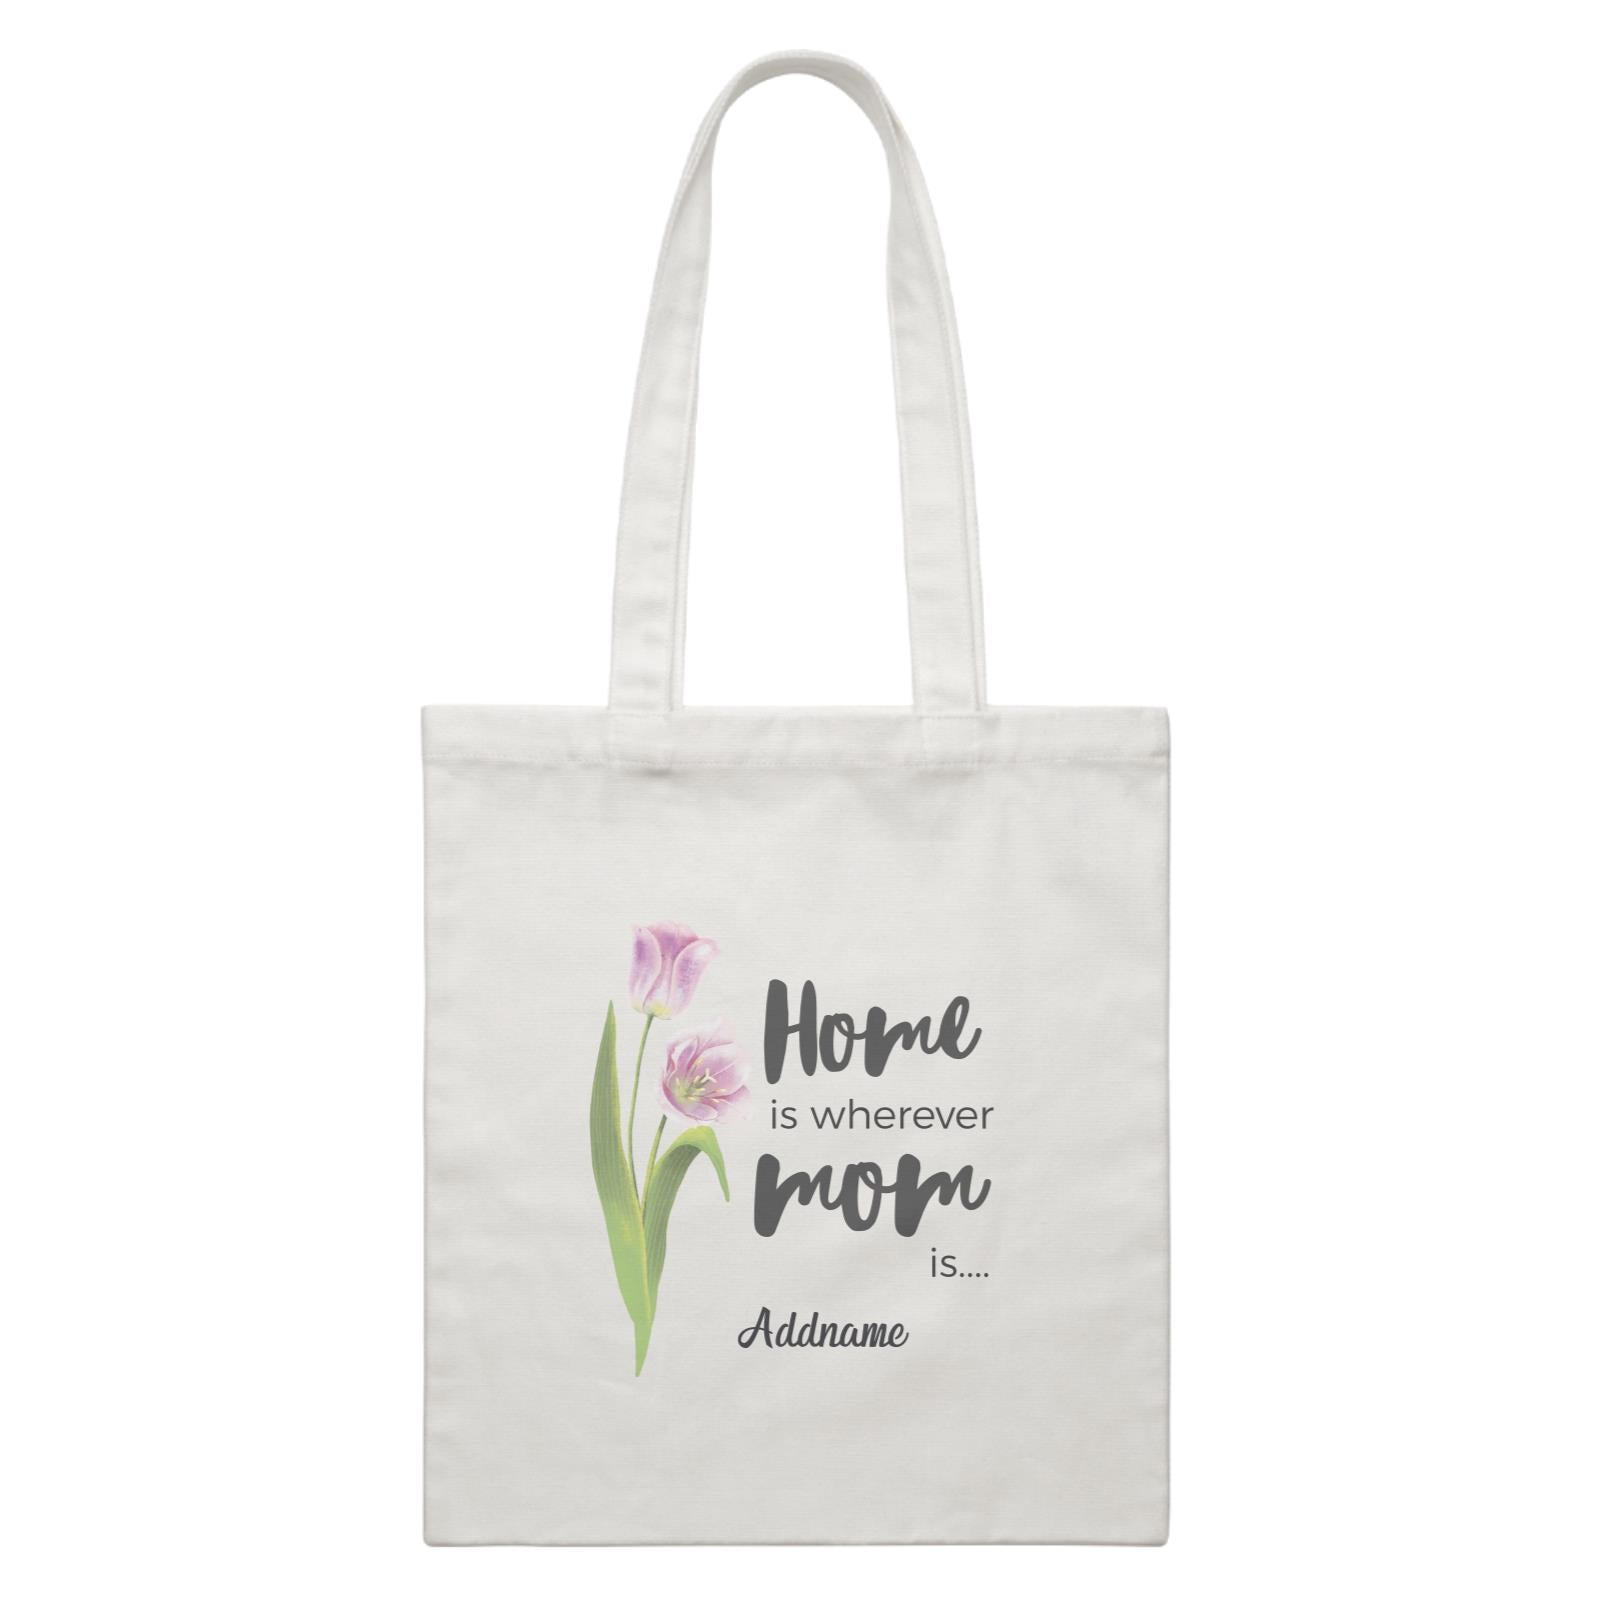 Sweet Mom Quotes 1 Tulip Home Is Wherever Mom Is Addname White Canvas Bag